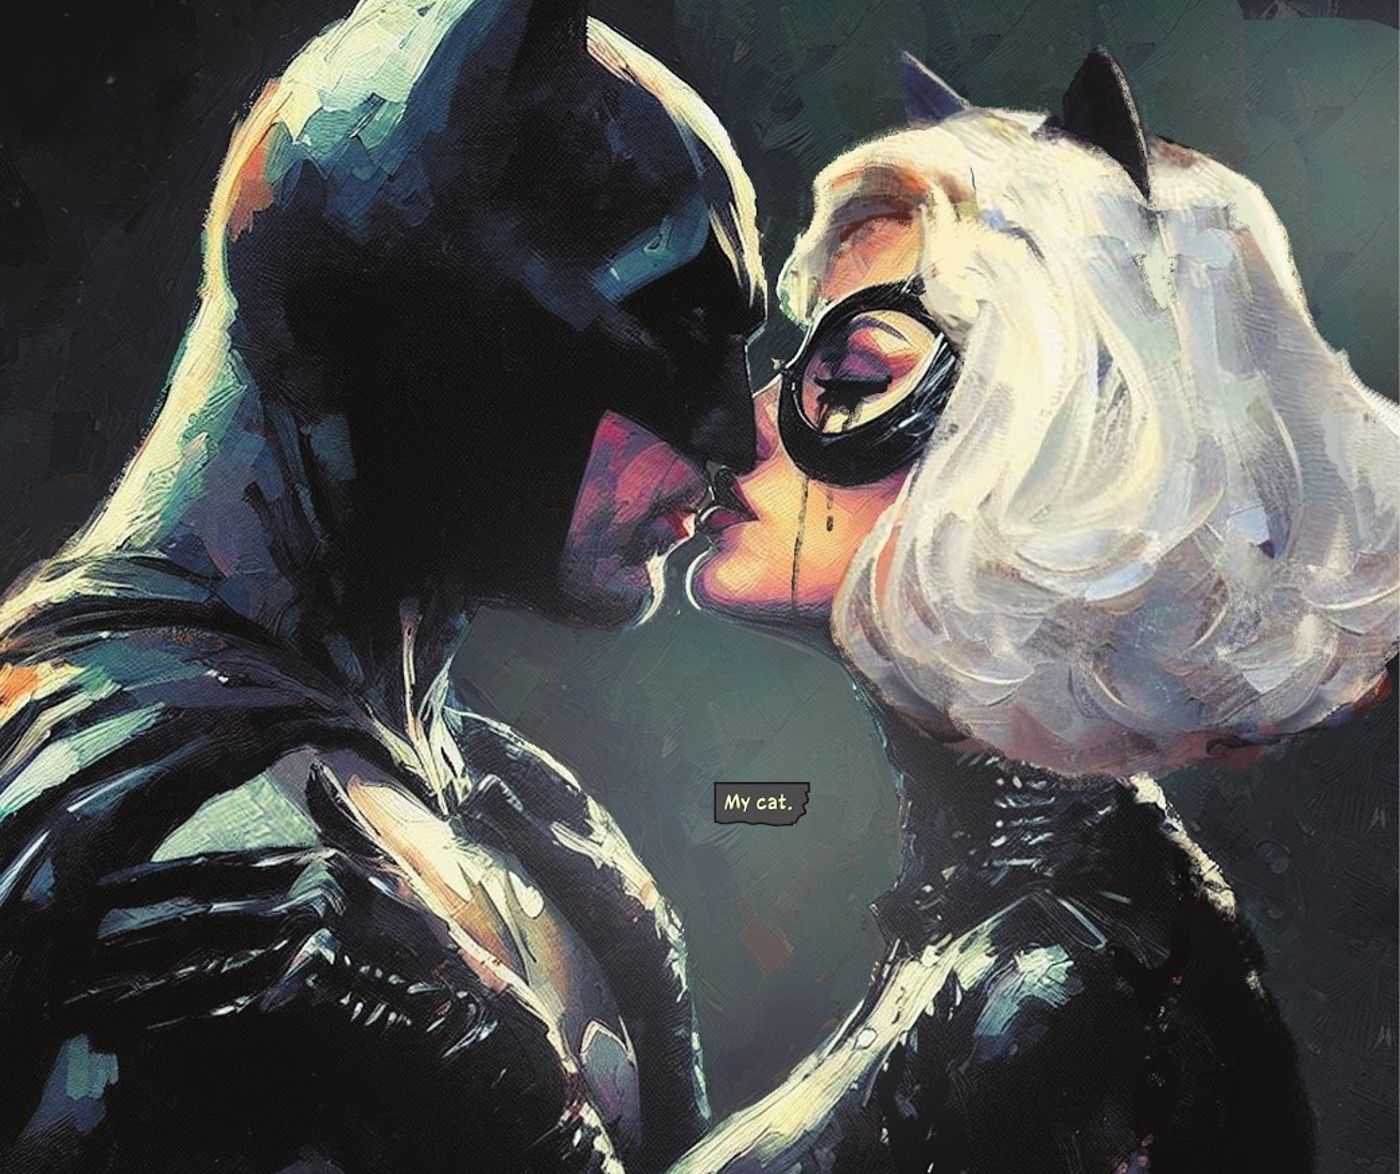 Comic book panel: a future version of Batman and Catwoman share a kiss.